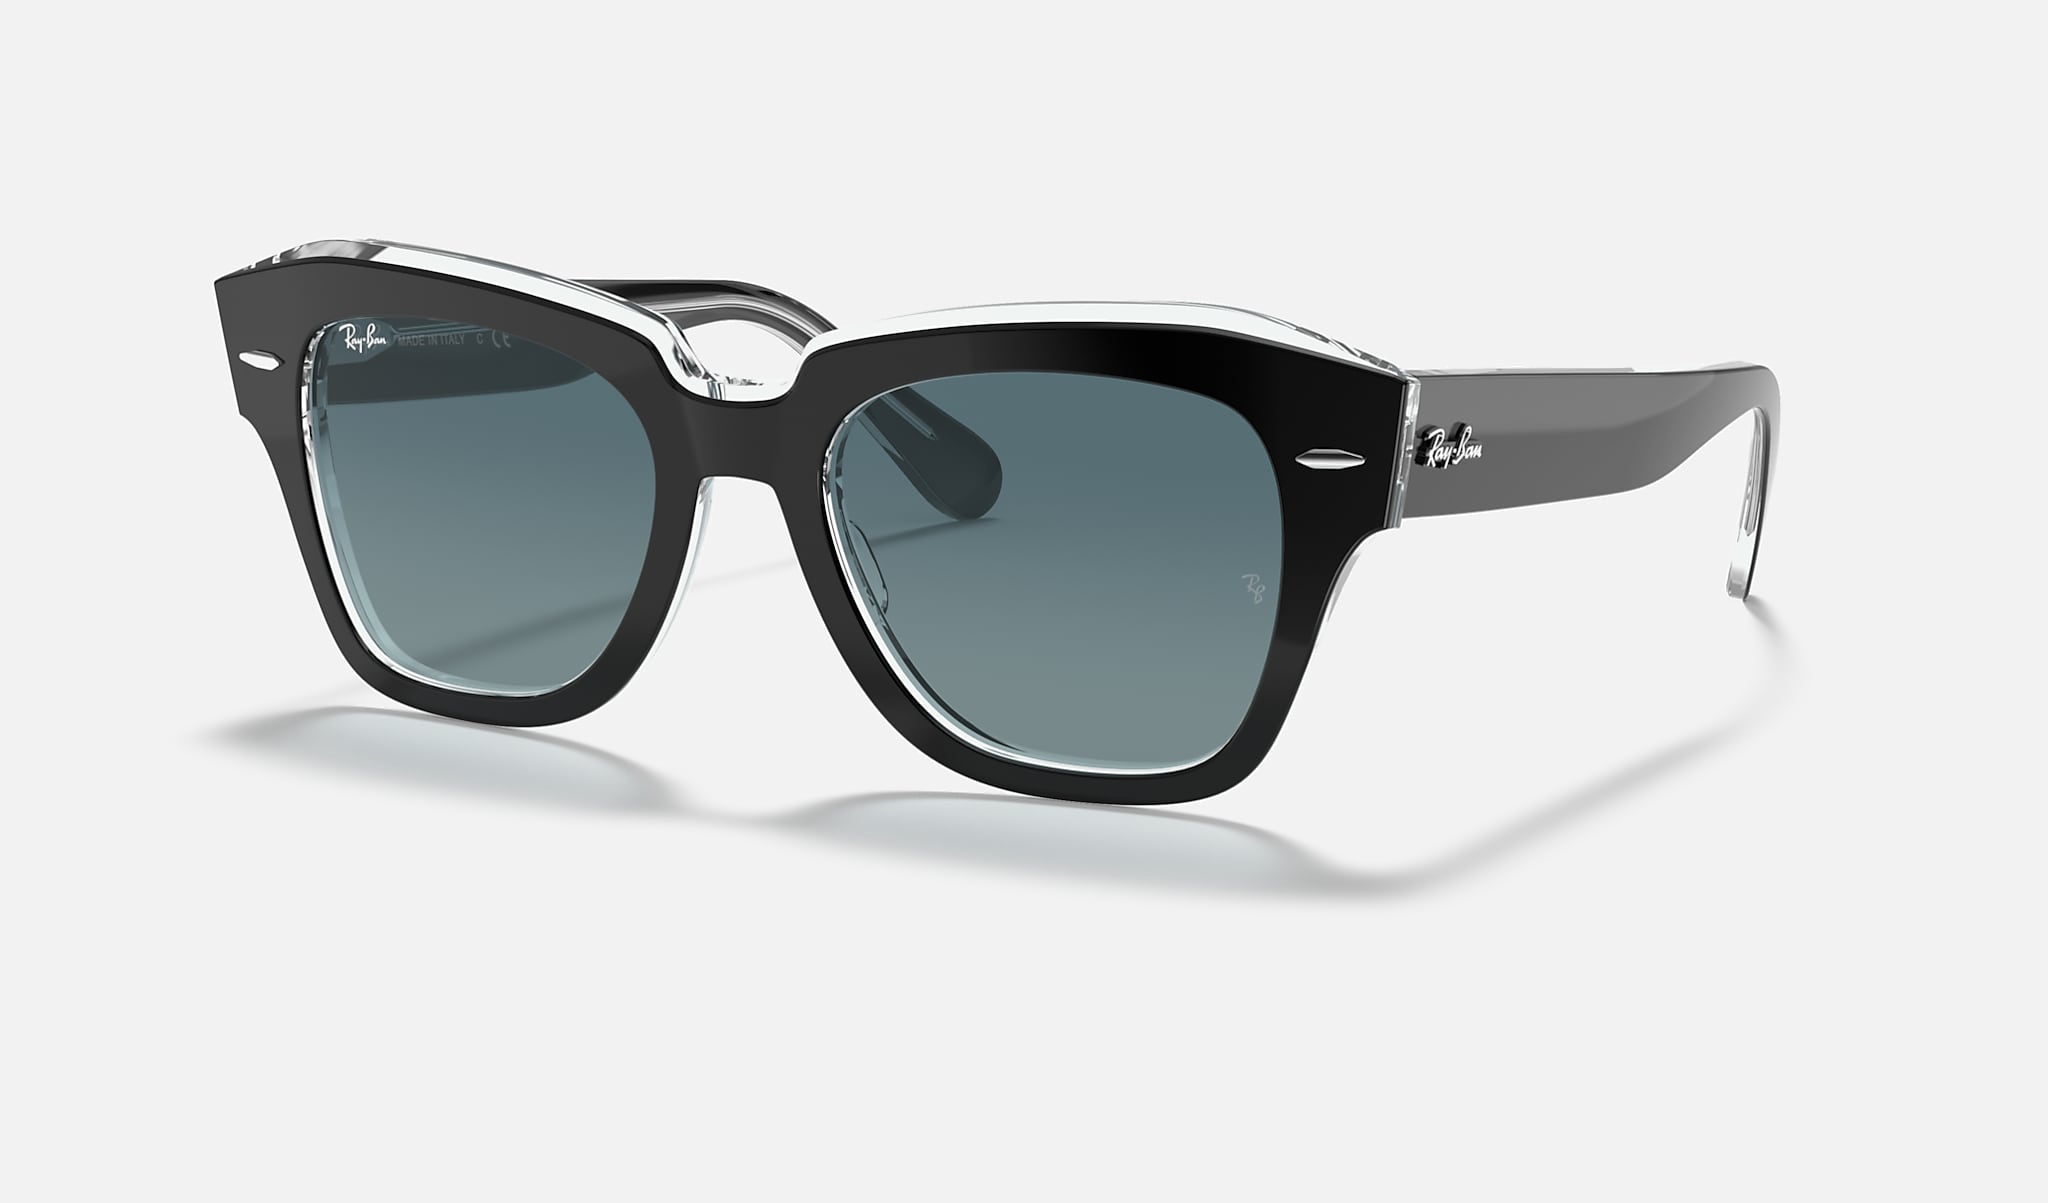 Ray-Ban 0RB2186 STATE STREET Polished Black On Transparent SUN